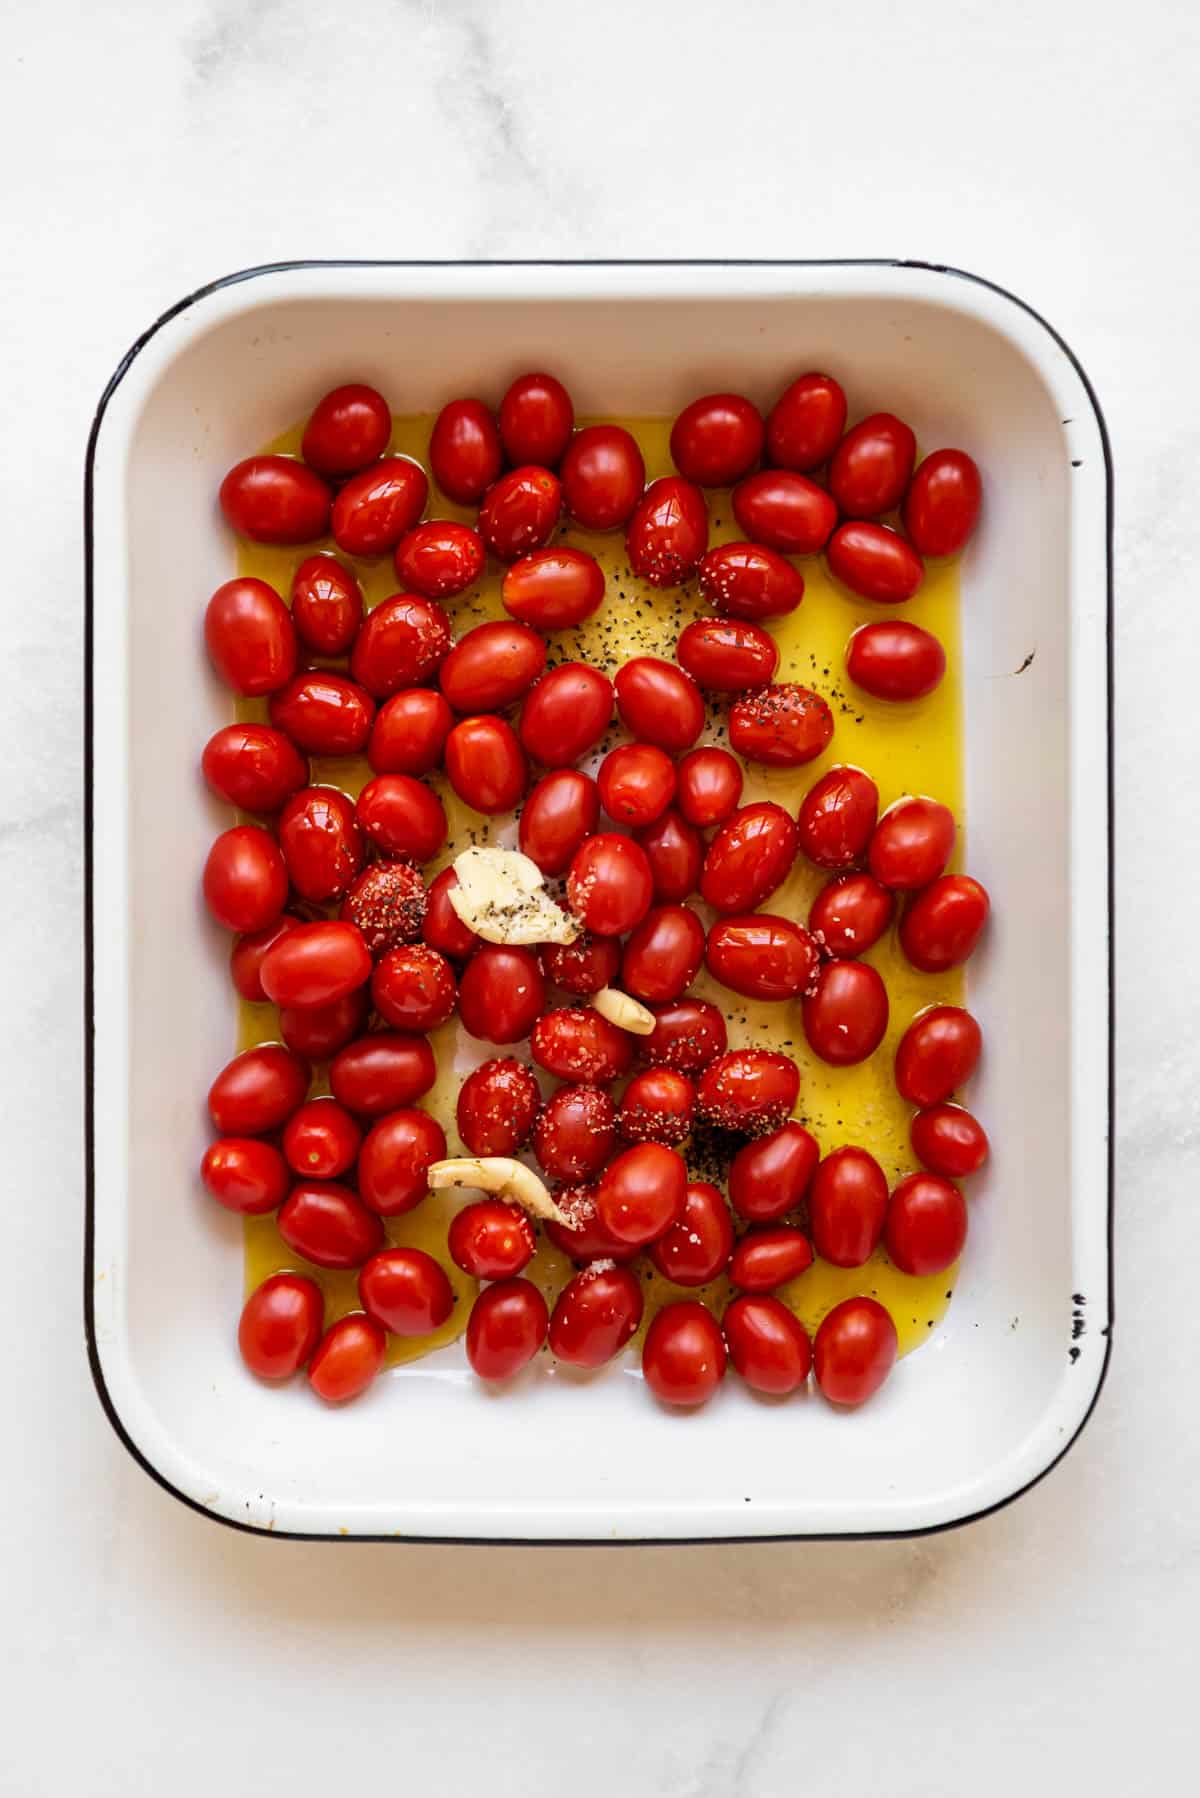 Combining olive oil, grape tomatoes, crushed garlic cloves, and seasoning in a baking dish.